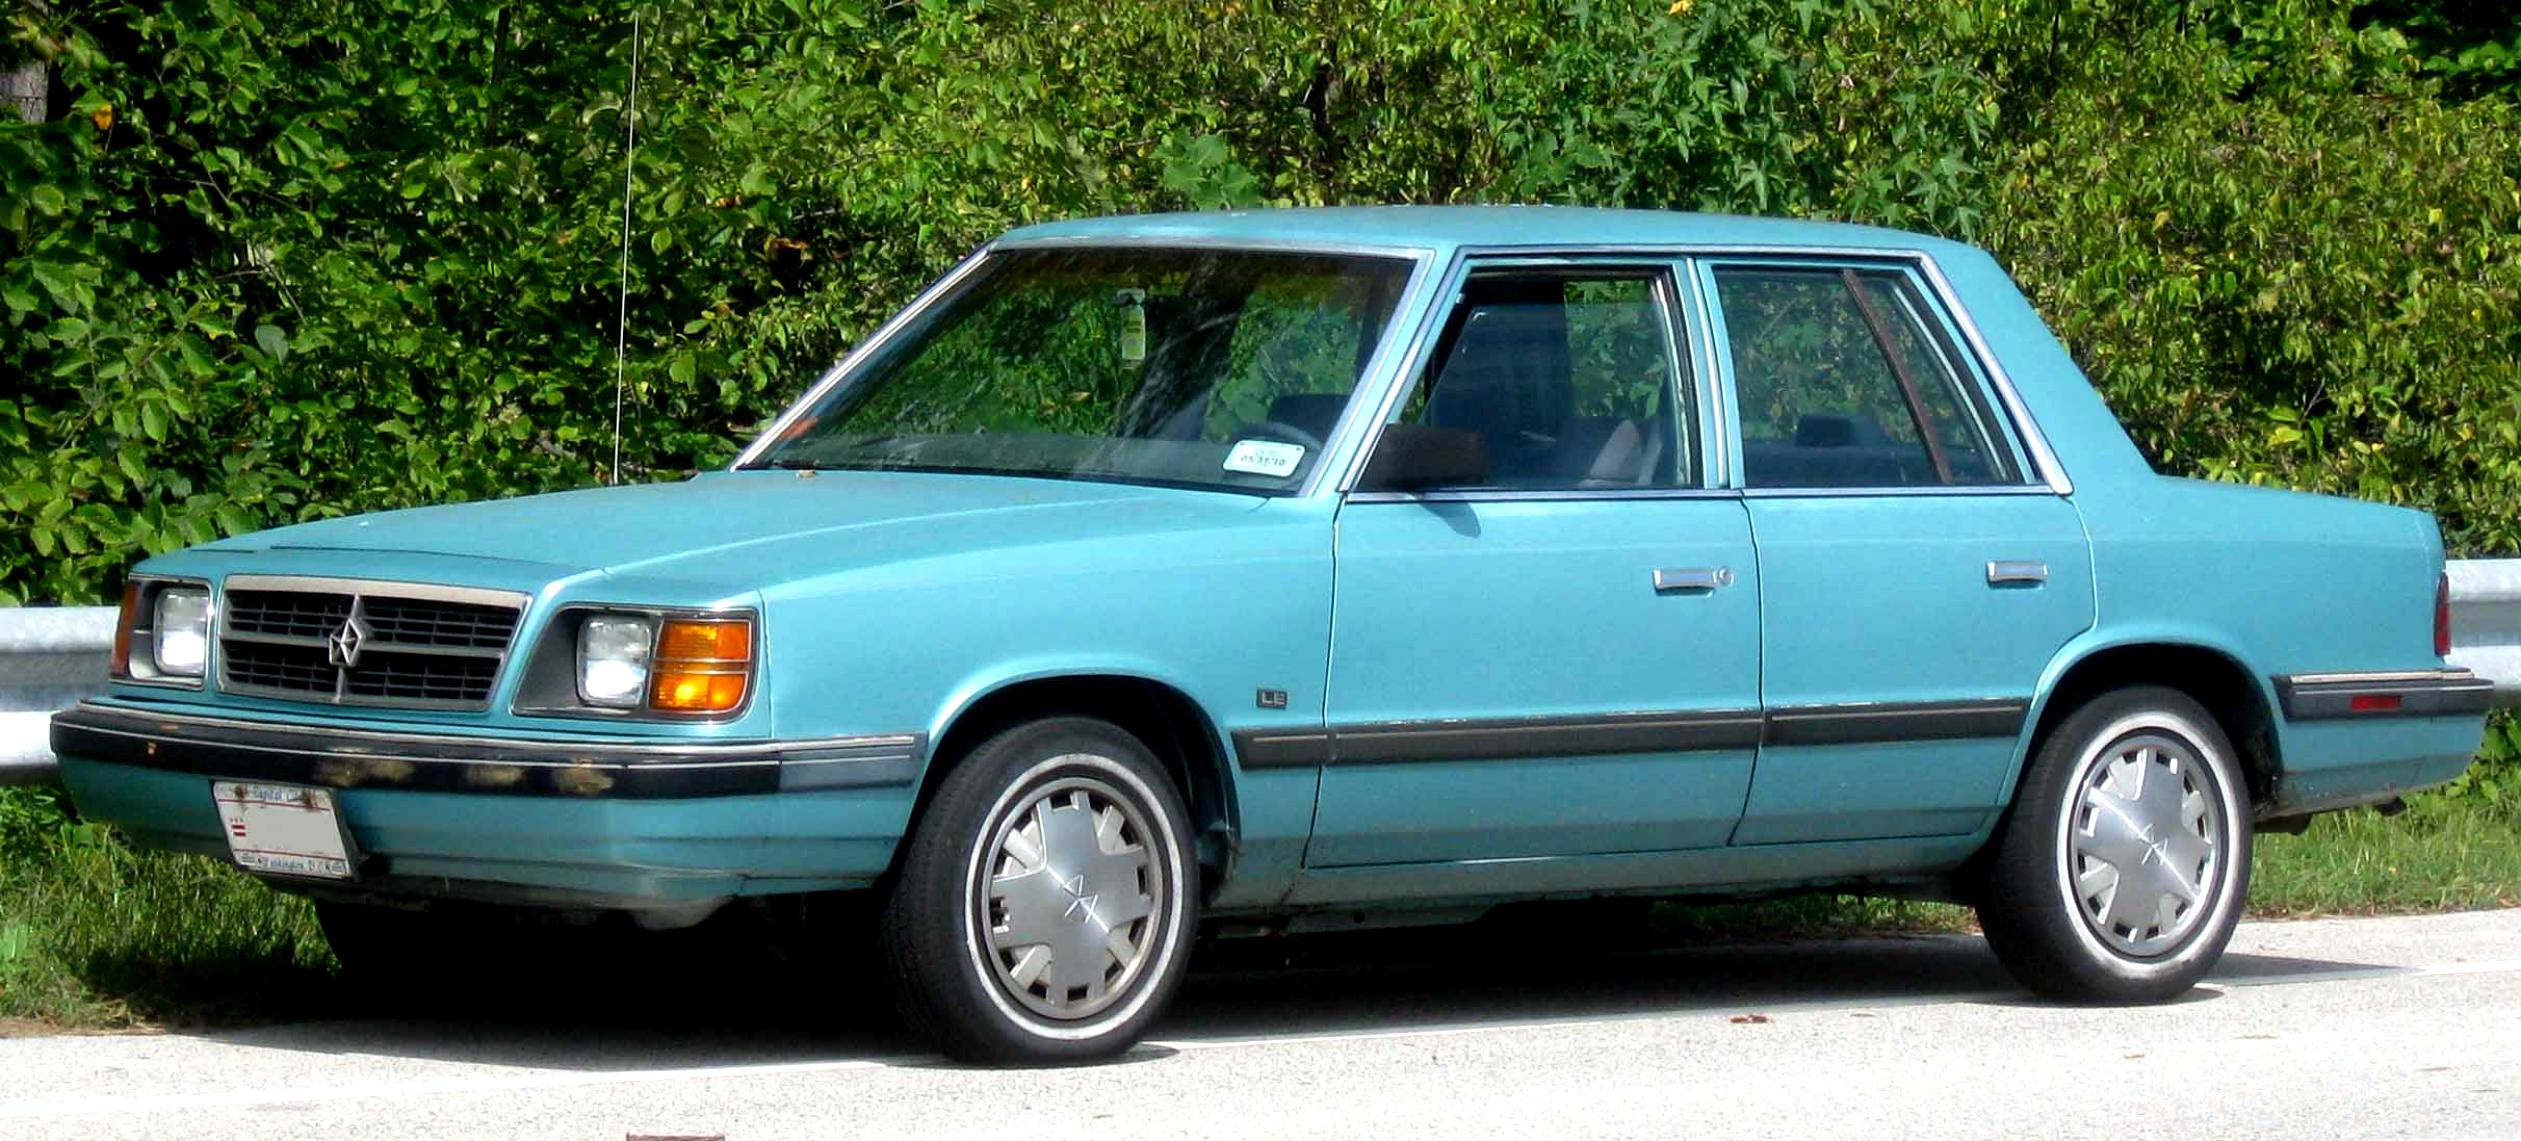 Dodge Aries Coupe 1981 #11